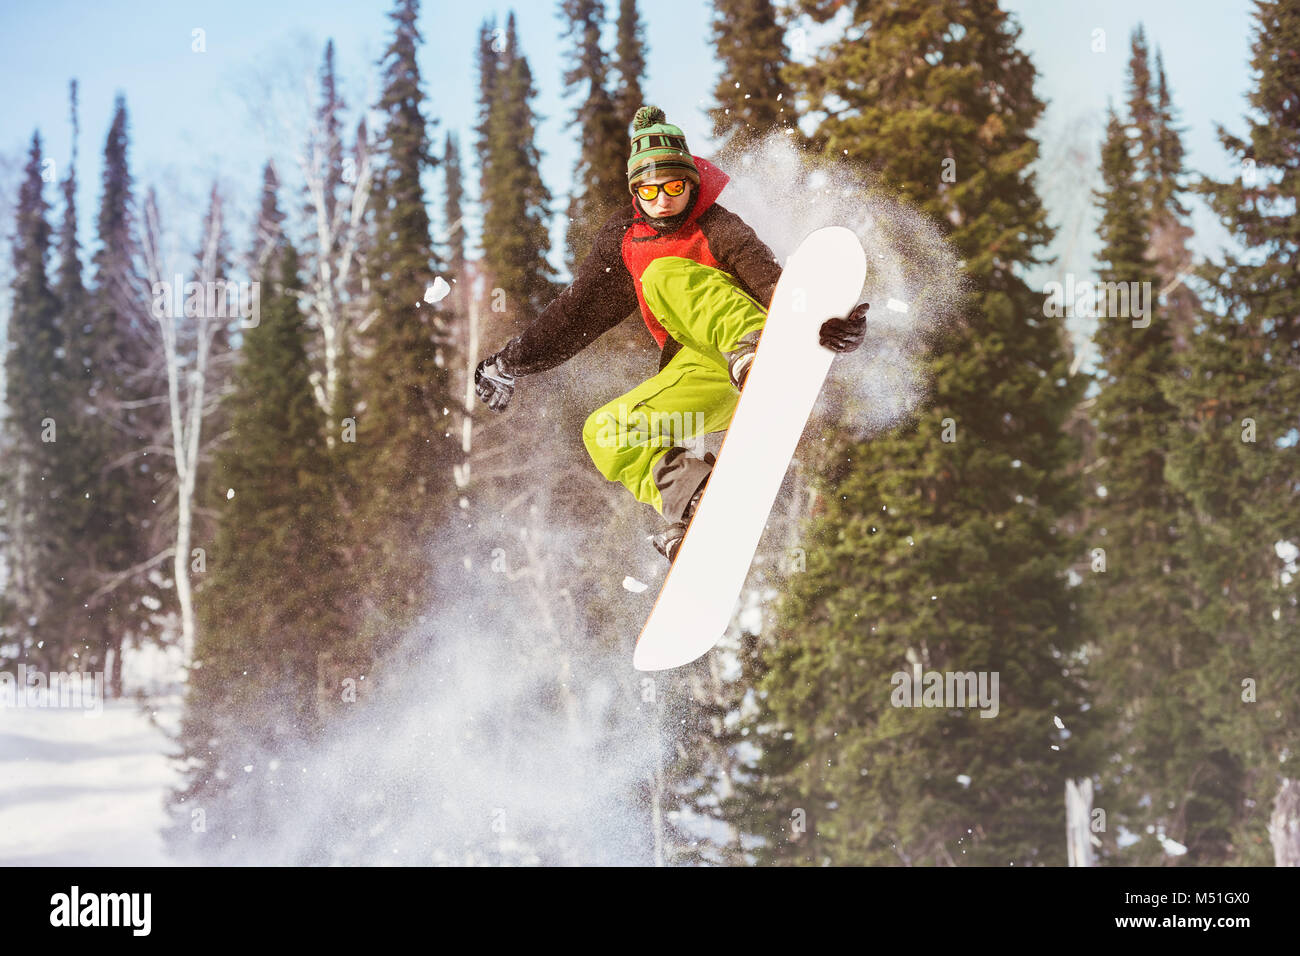 Snowboarder jumps at offpiste slope Stock Photo